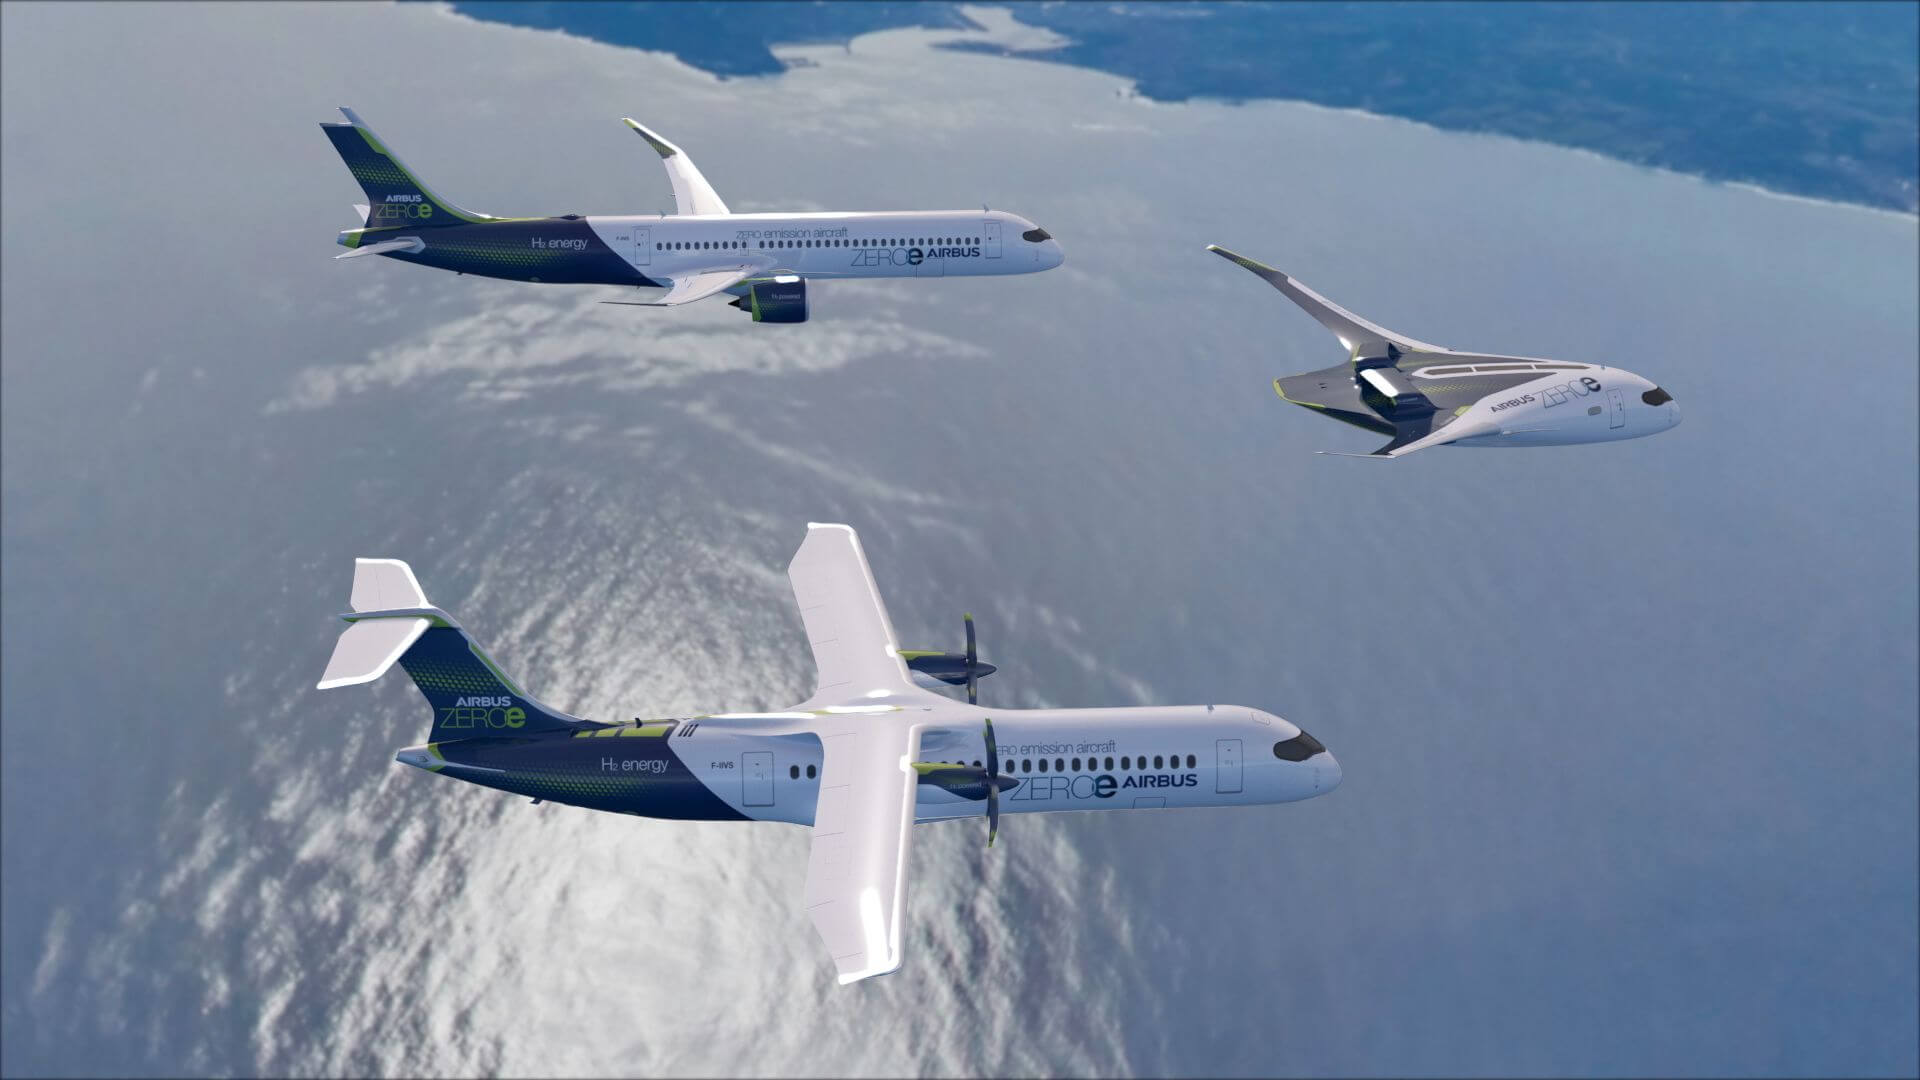 Airbus is collaborating on a consortium to lead green hydrogen aviation in New Zealand